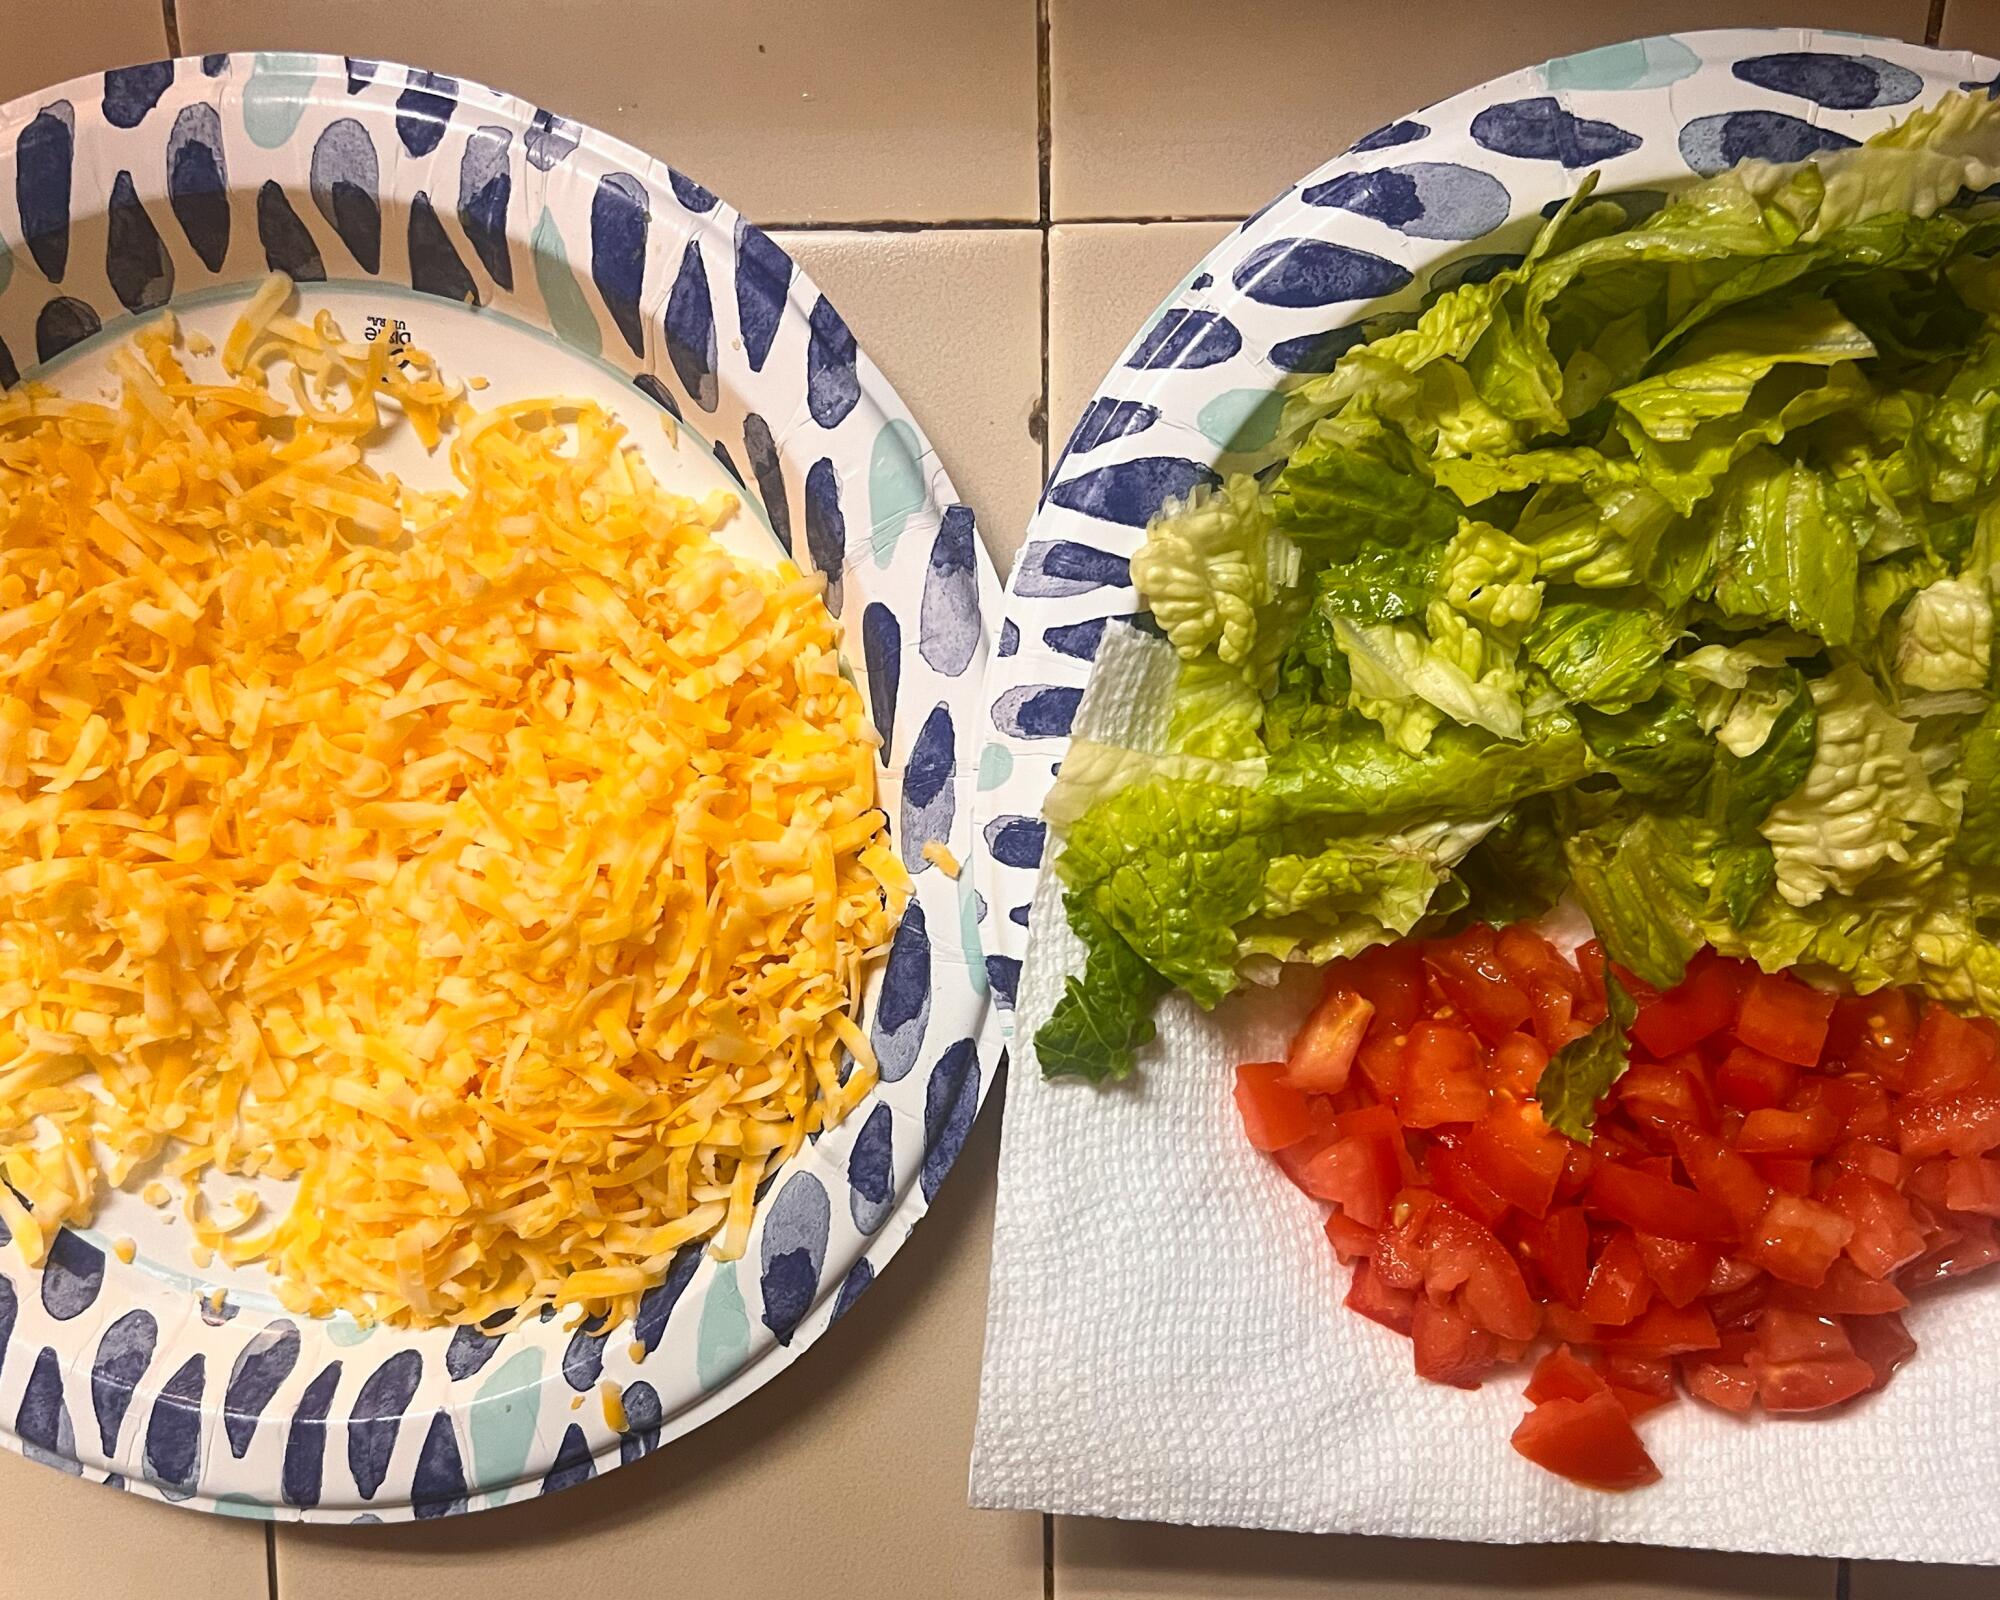 Plates with shredded cheese, lettuce and tomatoes.